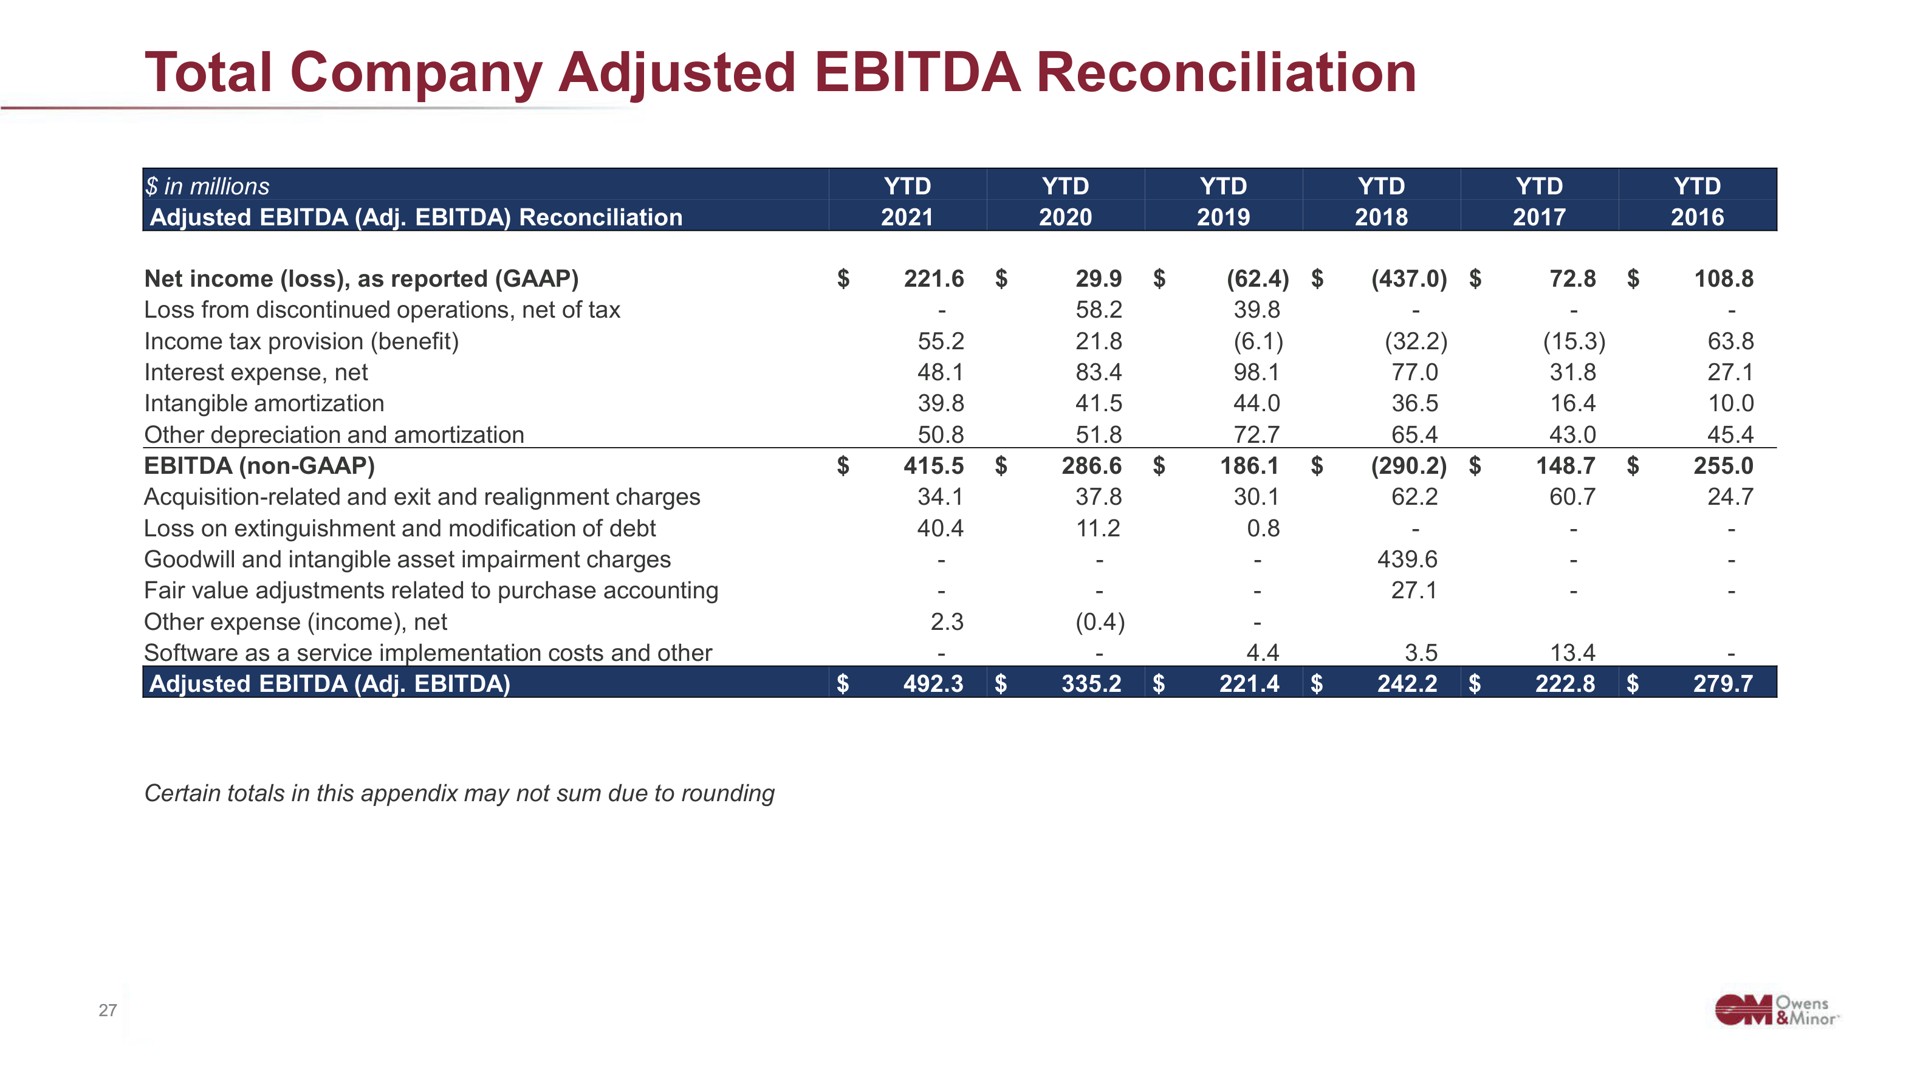 total company adjusted reconciliation | Owens&Minor